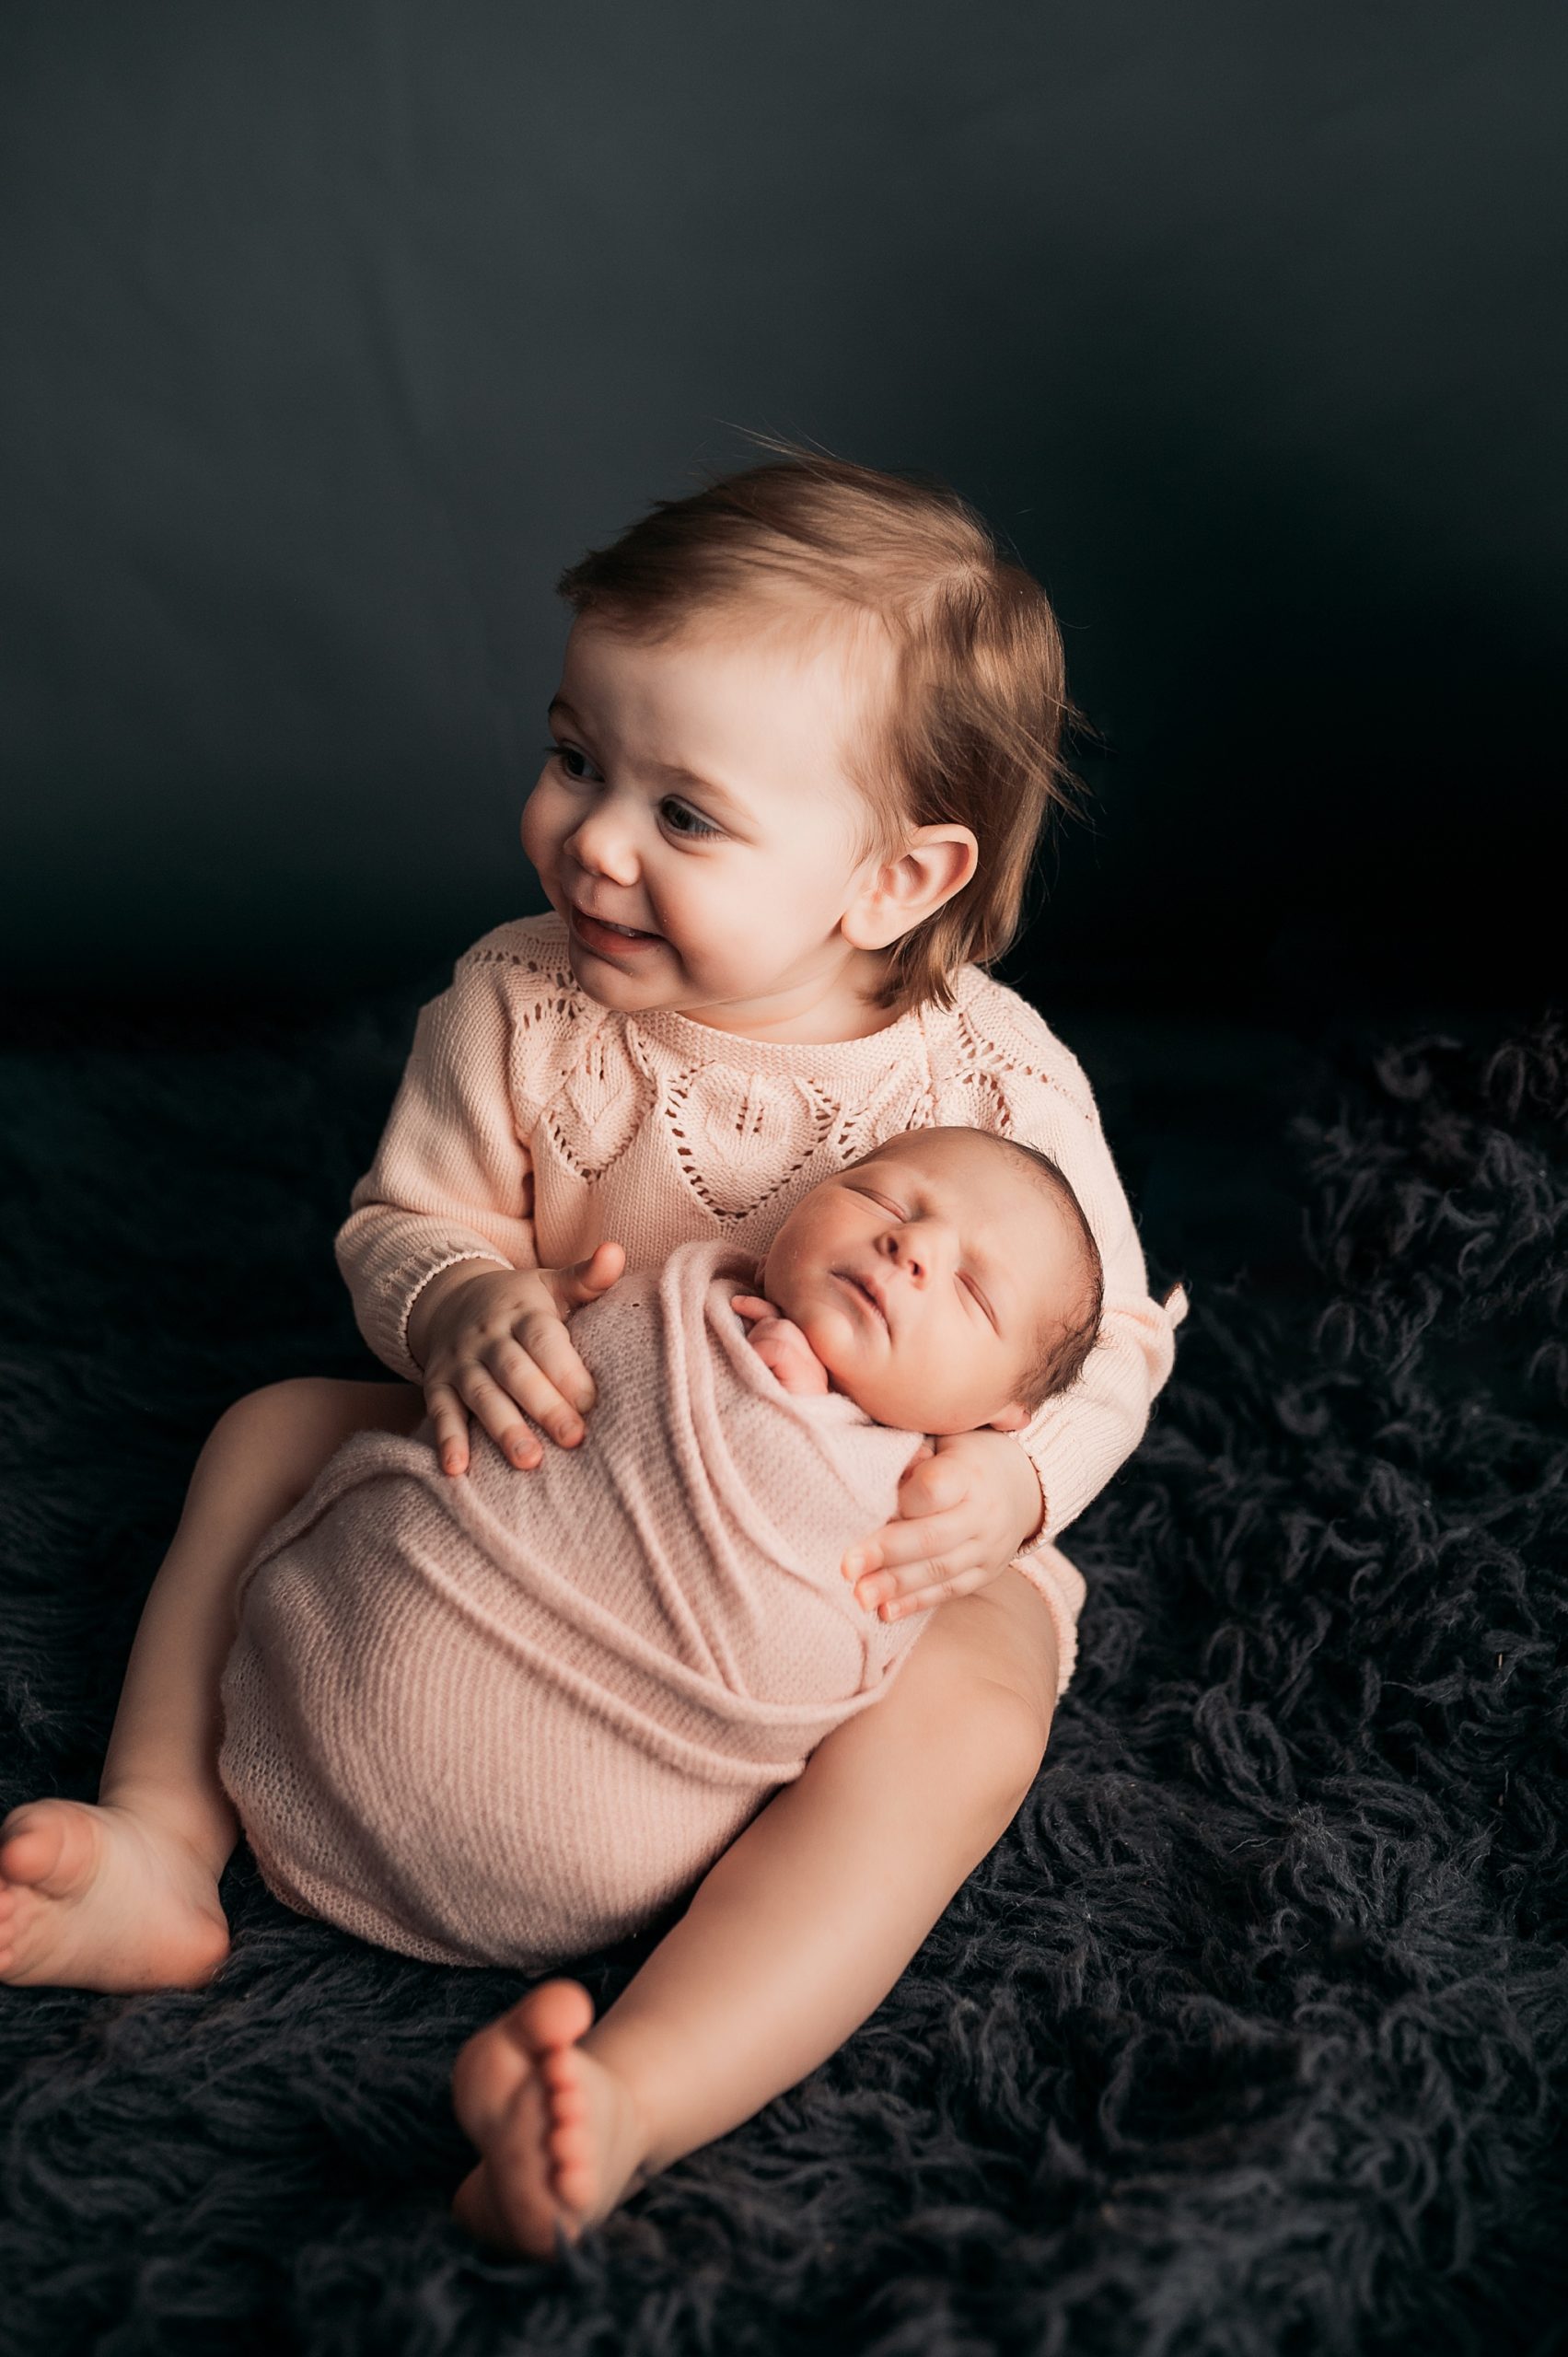 Big sister wearing pink smiling and holding newborn baby